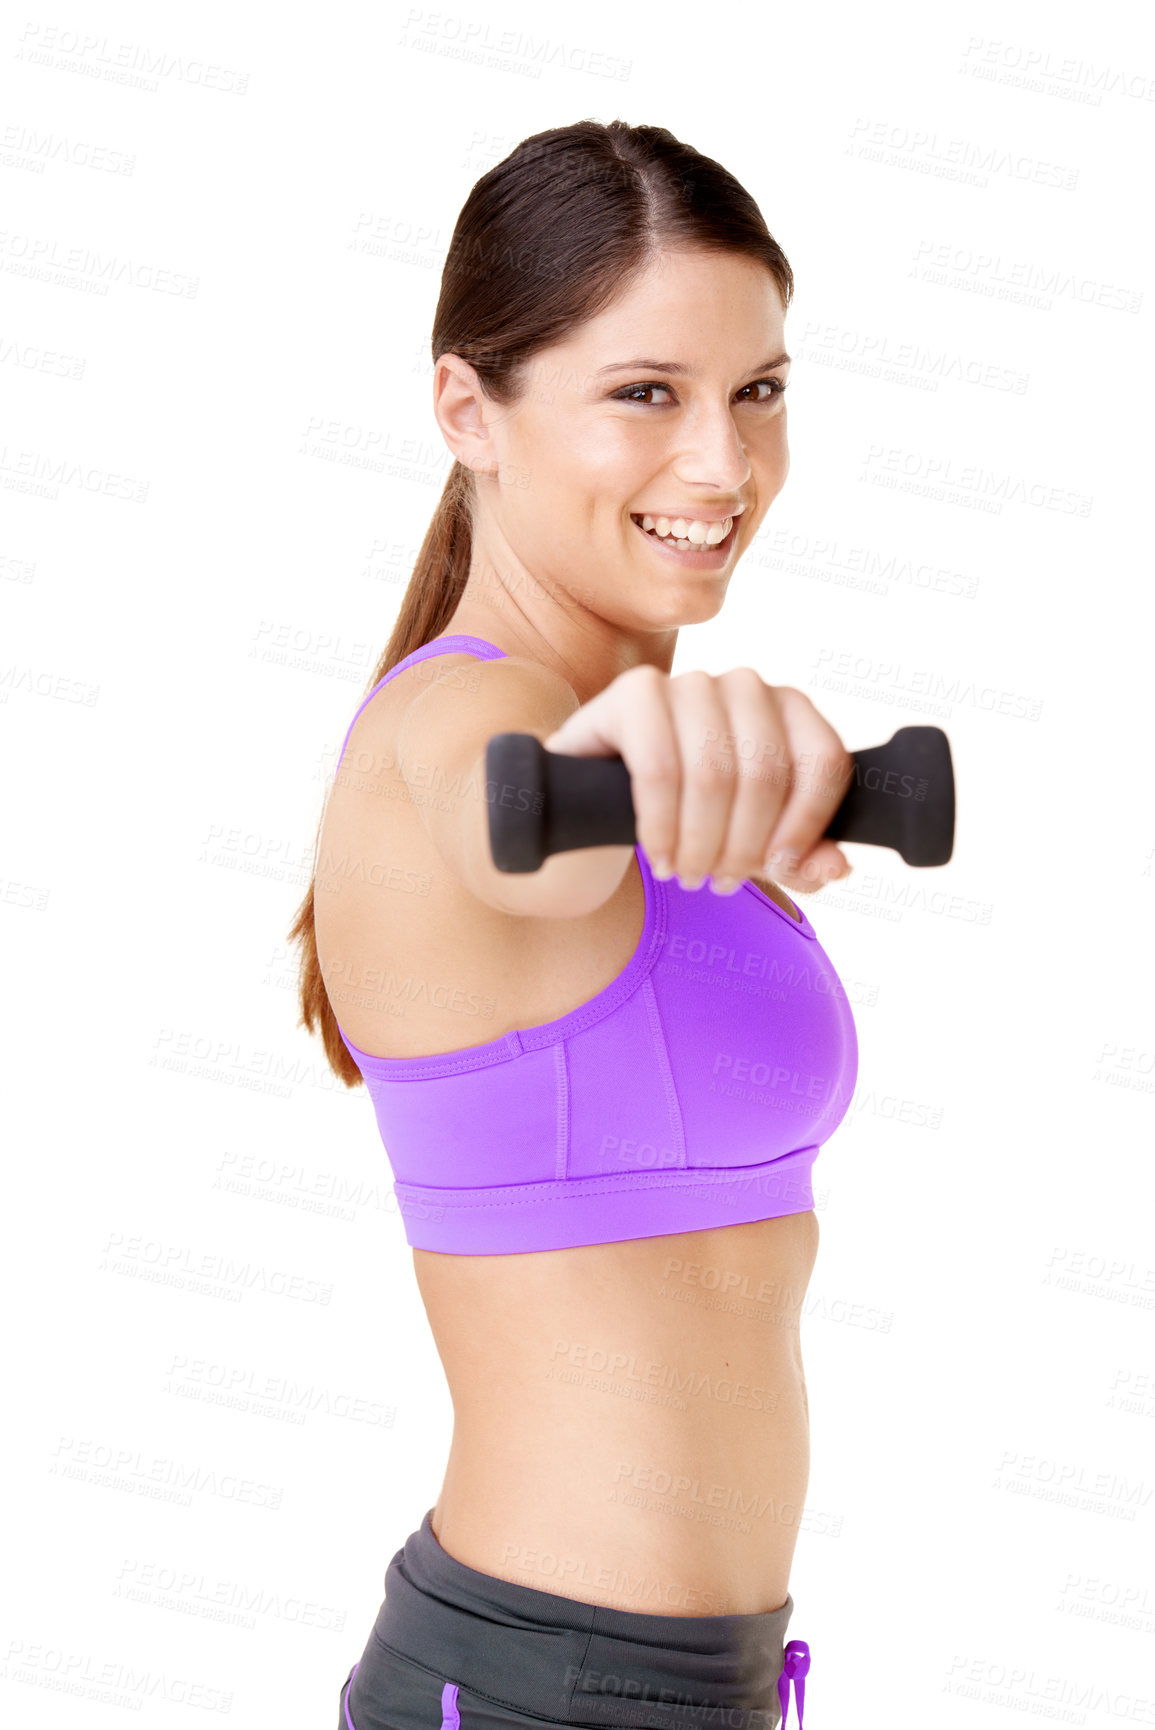 Buy stock photo Portrait, happy woman and dumbbell for fitness in studio with mock up on white background in Germany. Female person, athlete and equipment for weight, strength or power training in space with smile